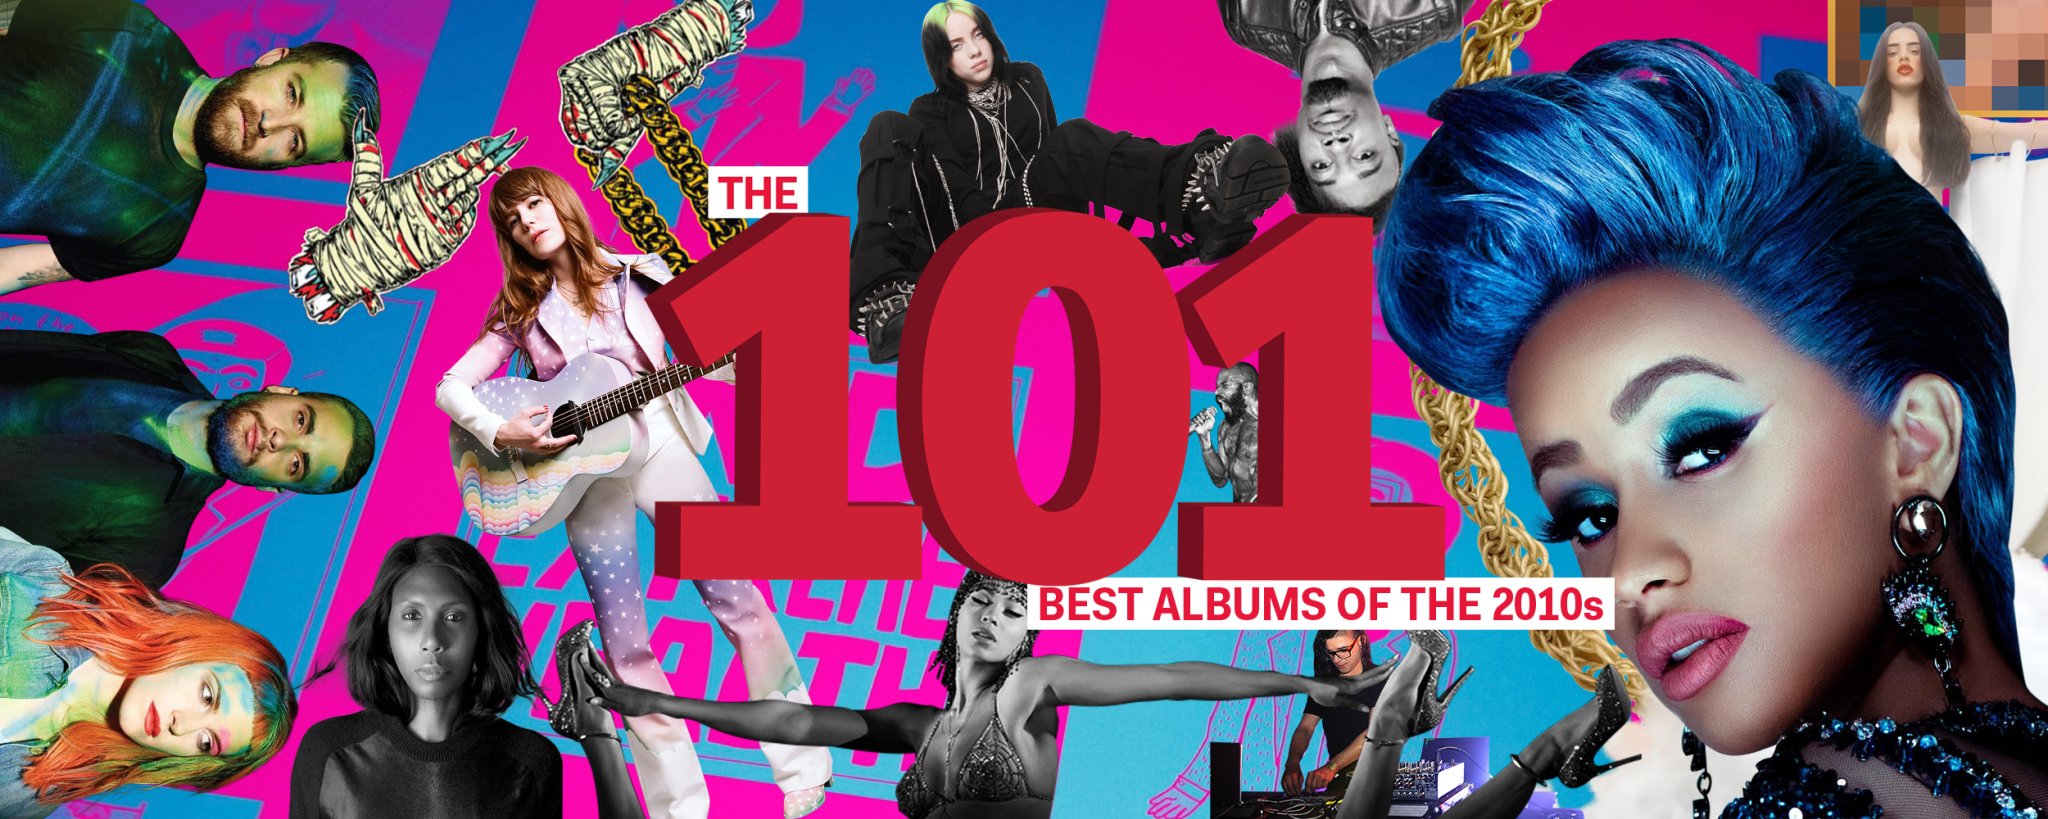 The 101 Best Albums of the 2010s